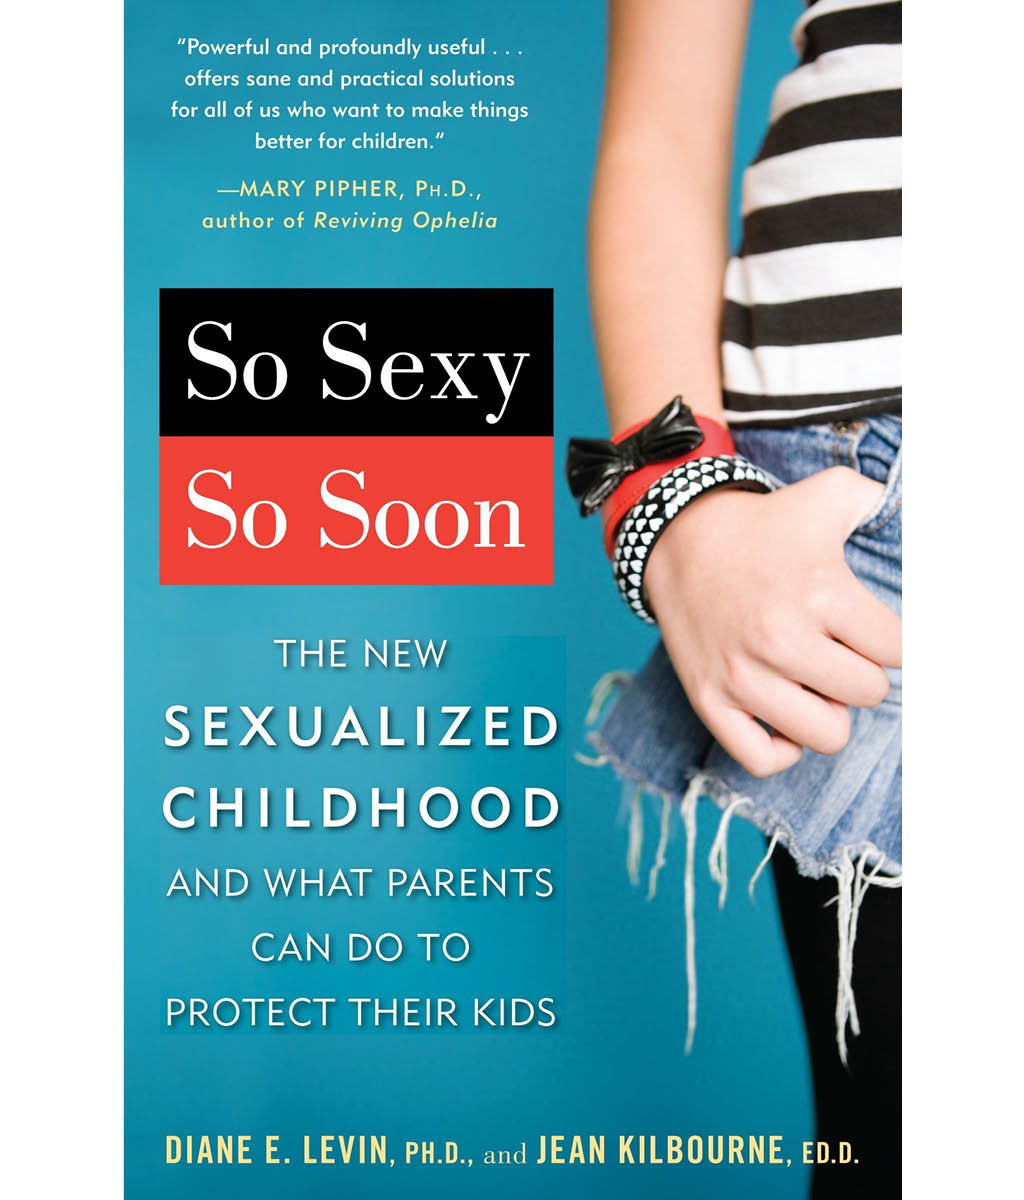 So Sexy So Soon: The New Sexualized Childhood and What Parents Can Do to Protect Their Kids by Levin Ph.D., Diane E., Kilbourne Ed.D., Jean